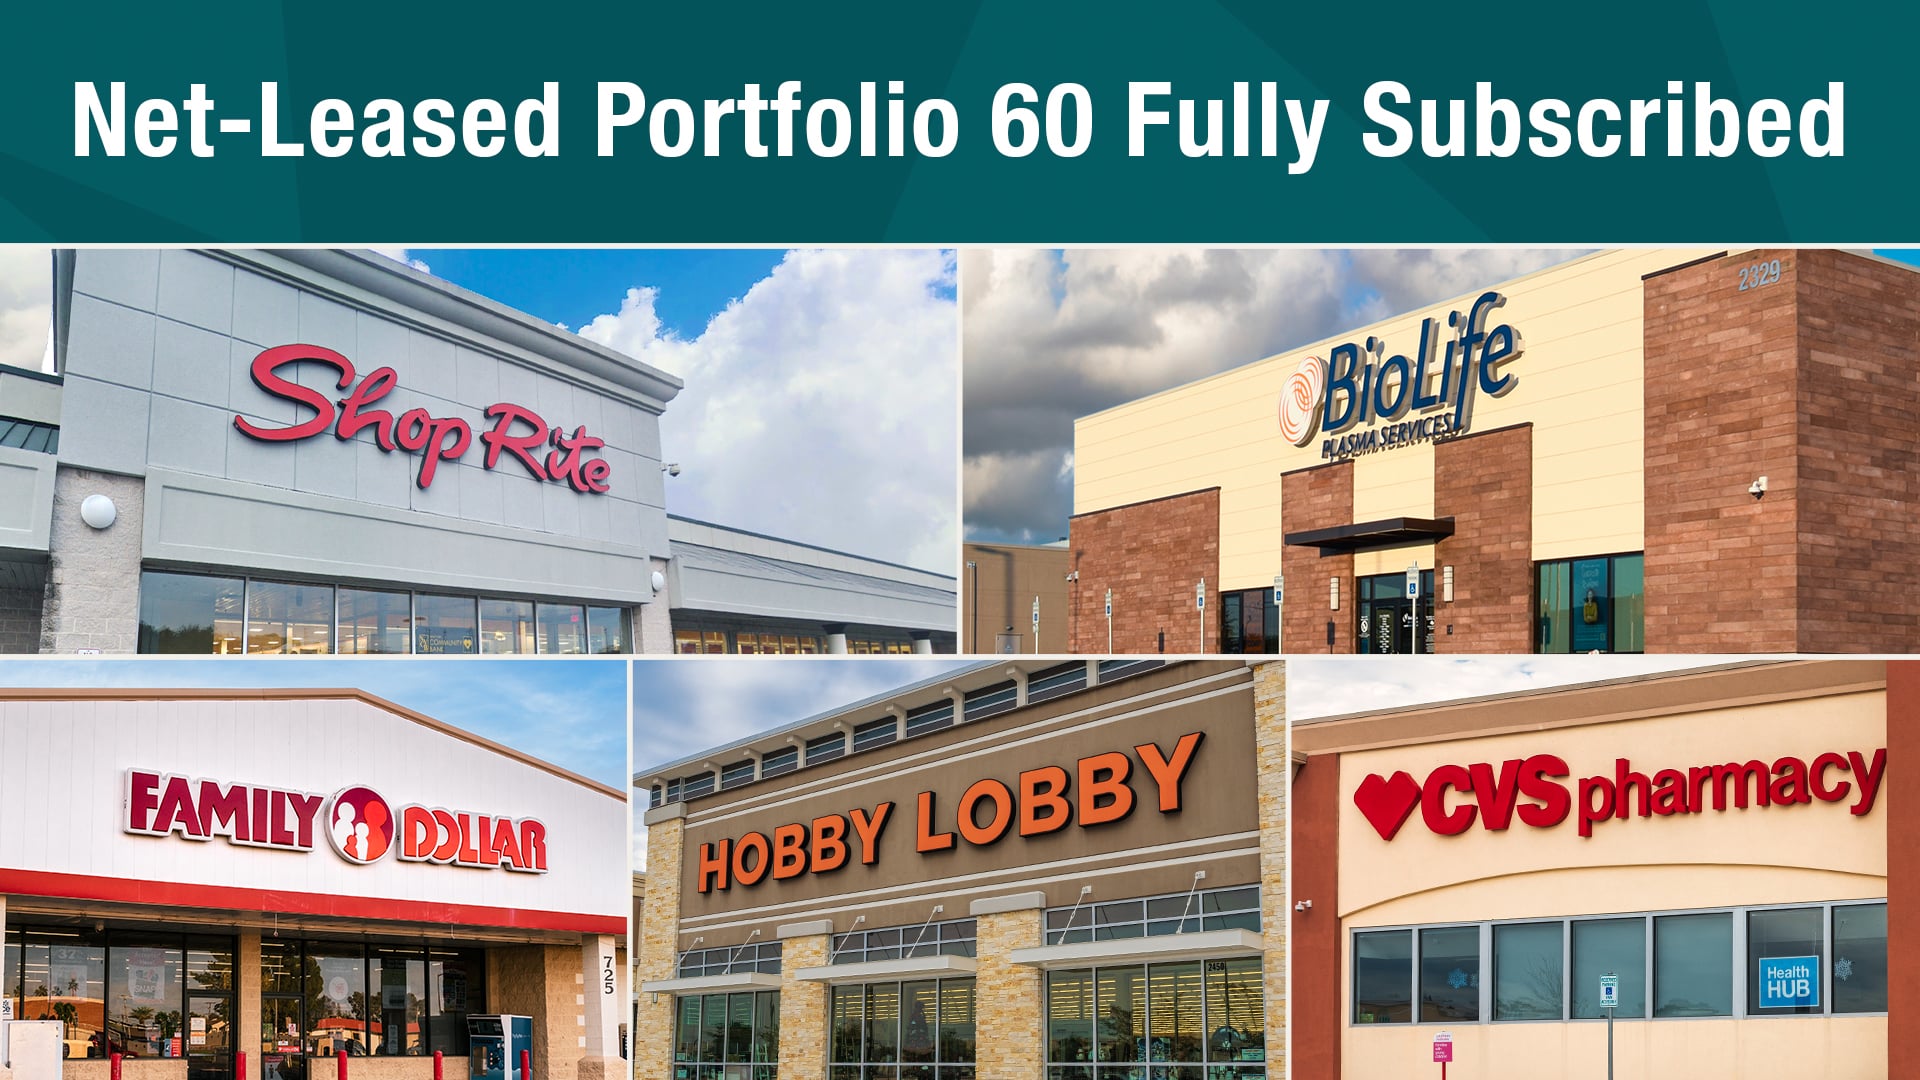 Net-Leased Portfolio 60 - Fully Subscribed